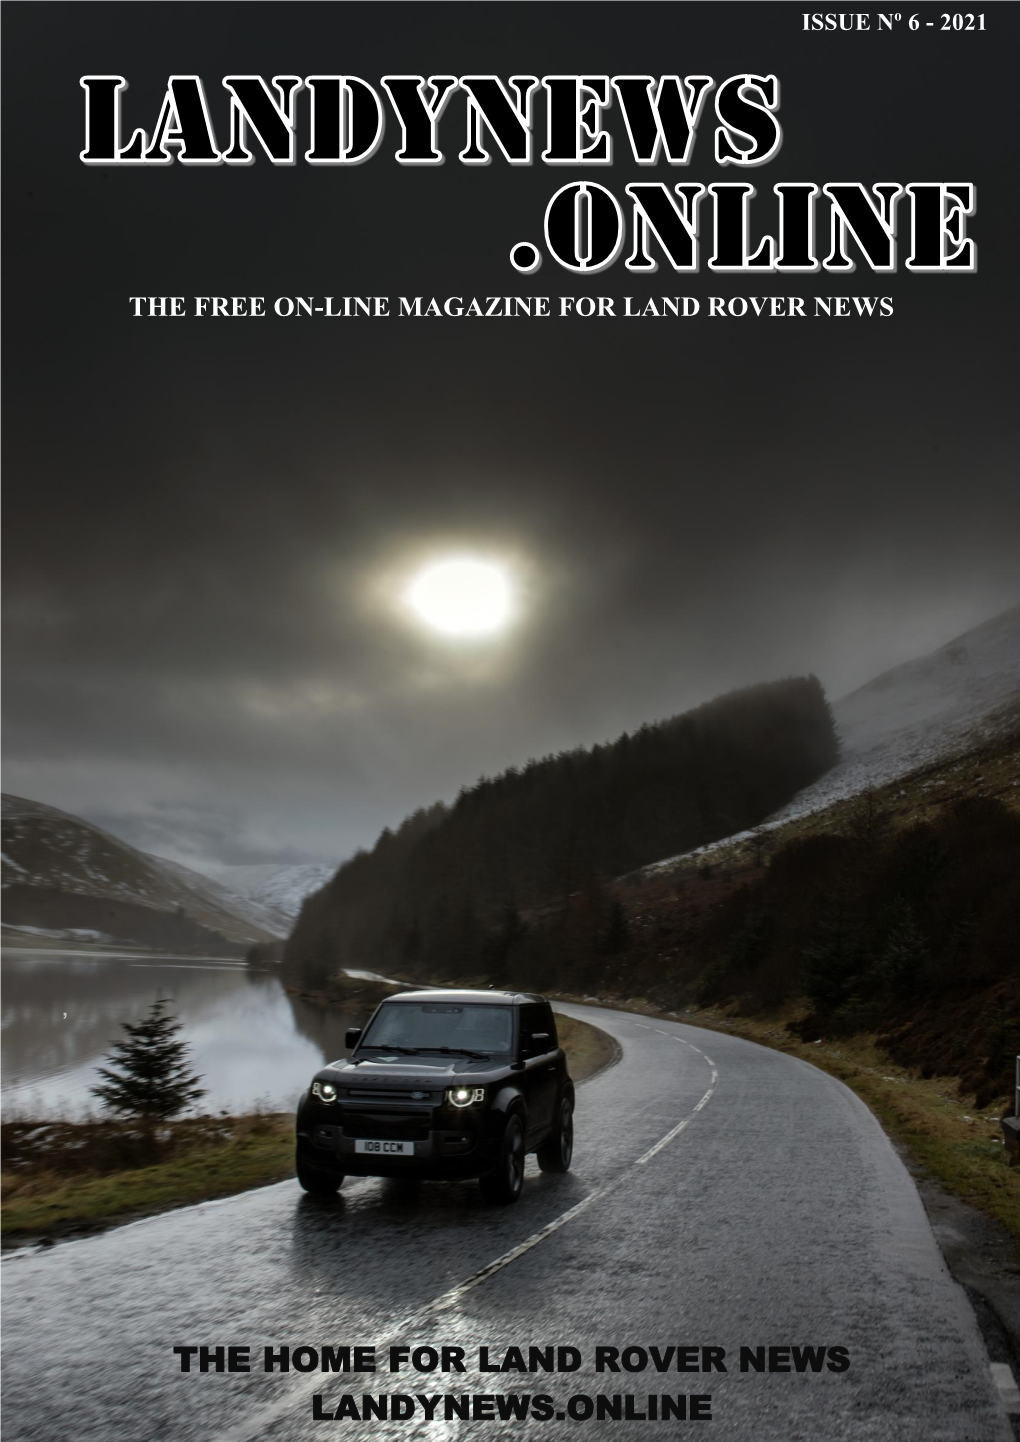 The Home for Land Rover News Landynews.Online